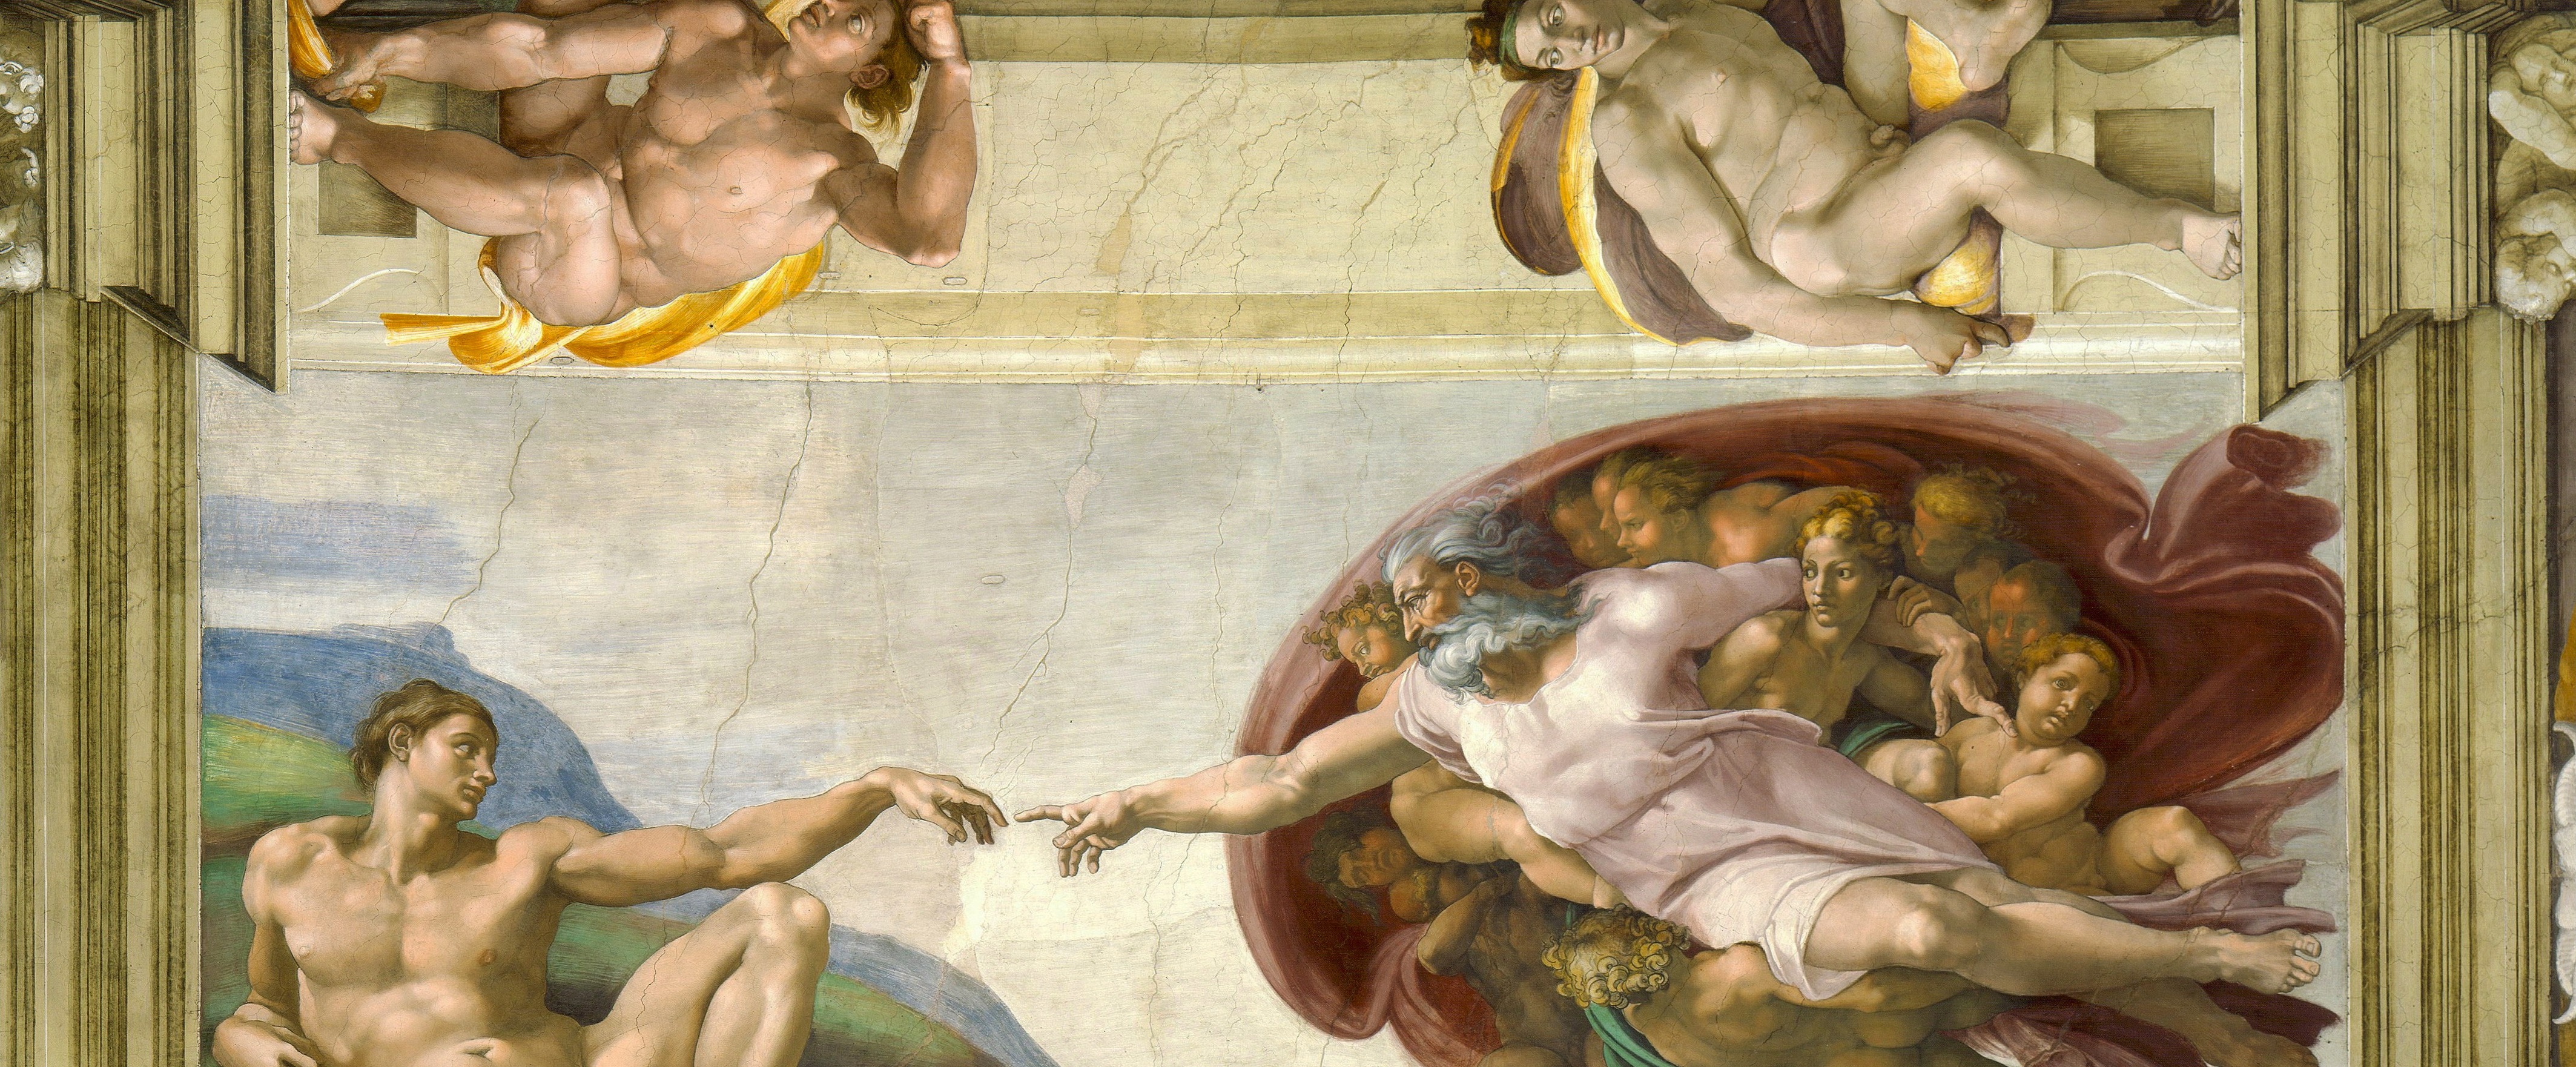 Michelangelo’s The Creation of Adam on the ceiling of the Sistine Chapel in Rome is one of the most famous artworks of the Renaissance. (Image via Wikipedia) 